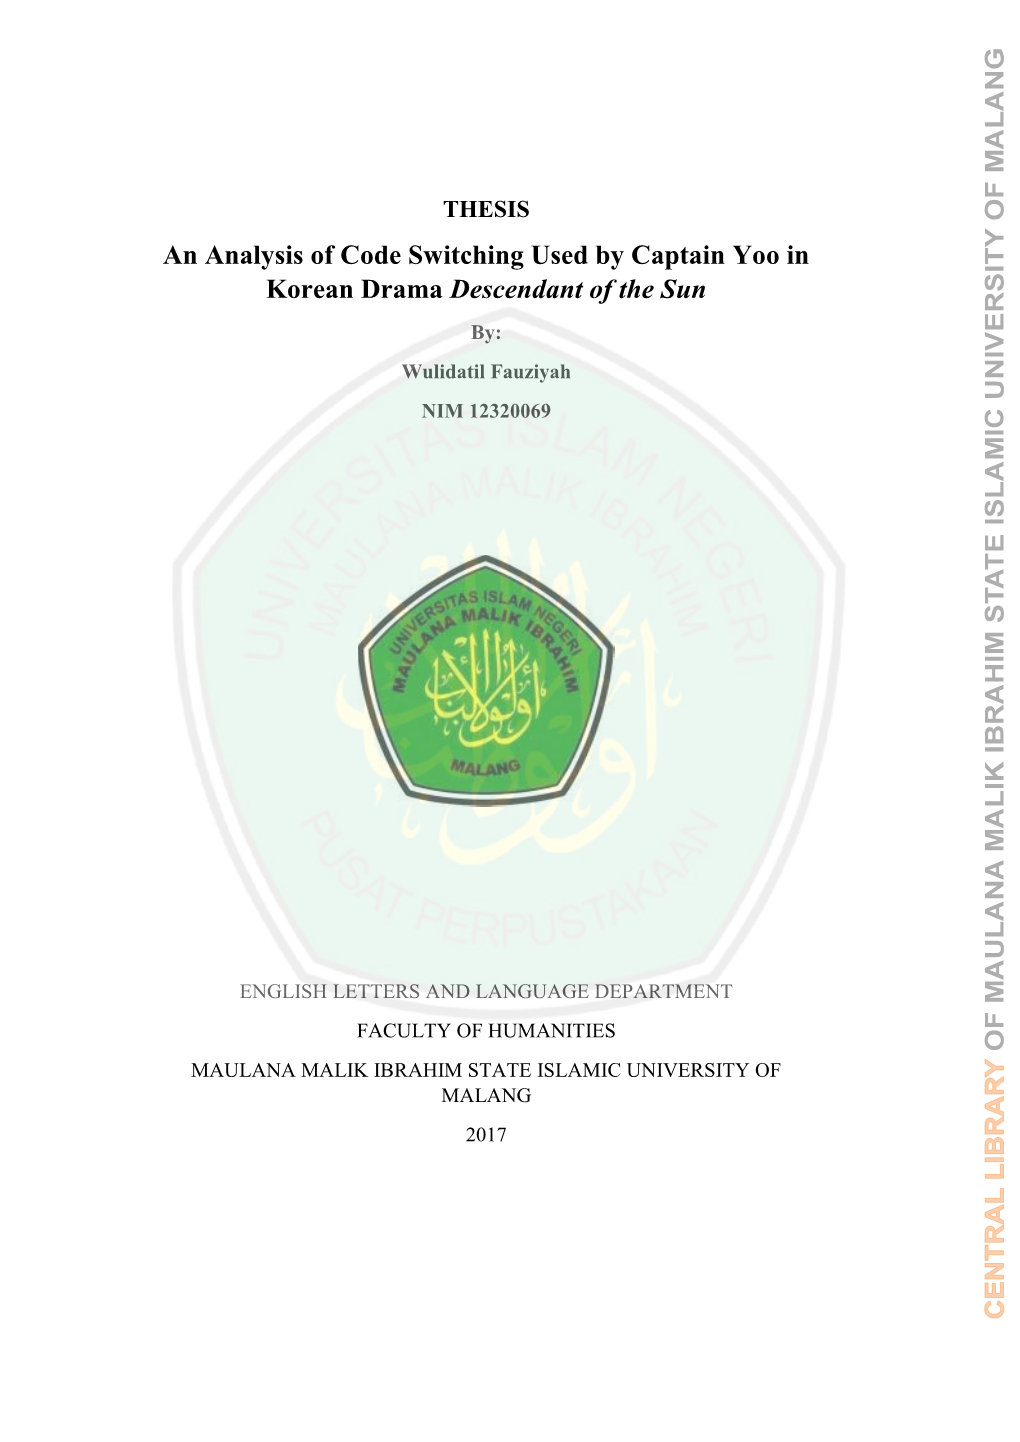 An Analysis of Code Switching Used by Captain Yoo in Korean Drama Descendant of the Sun By: Wulidatil Fauziyah NIM 12320069